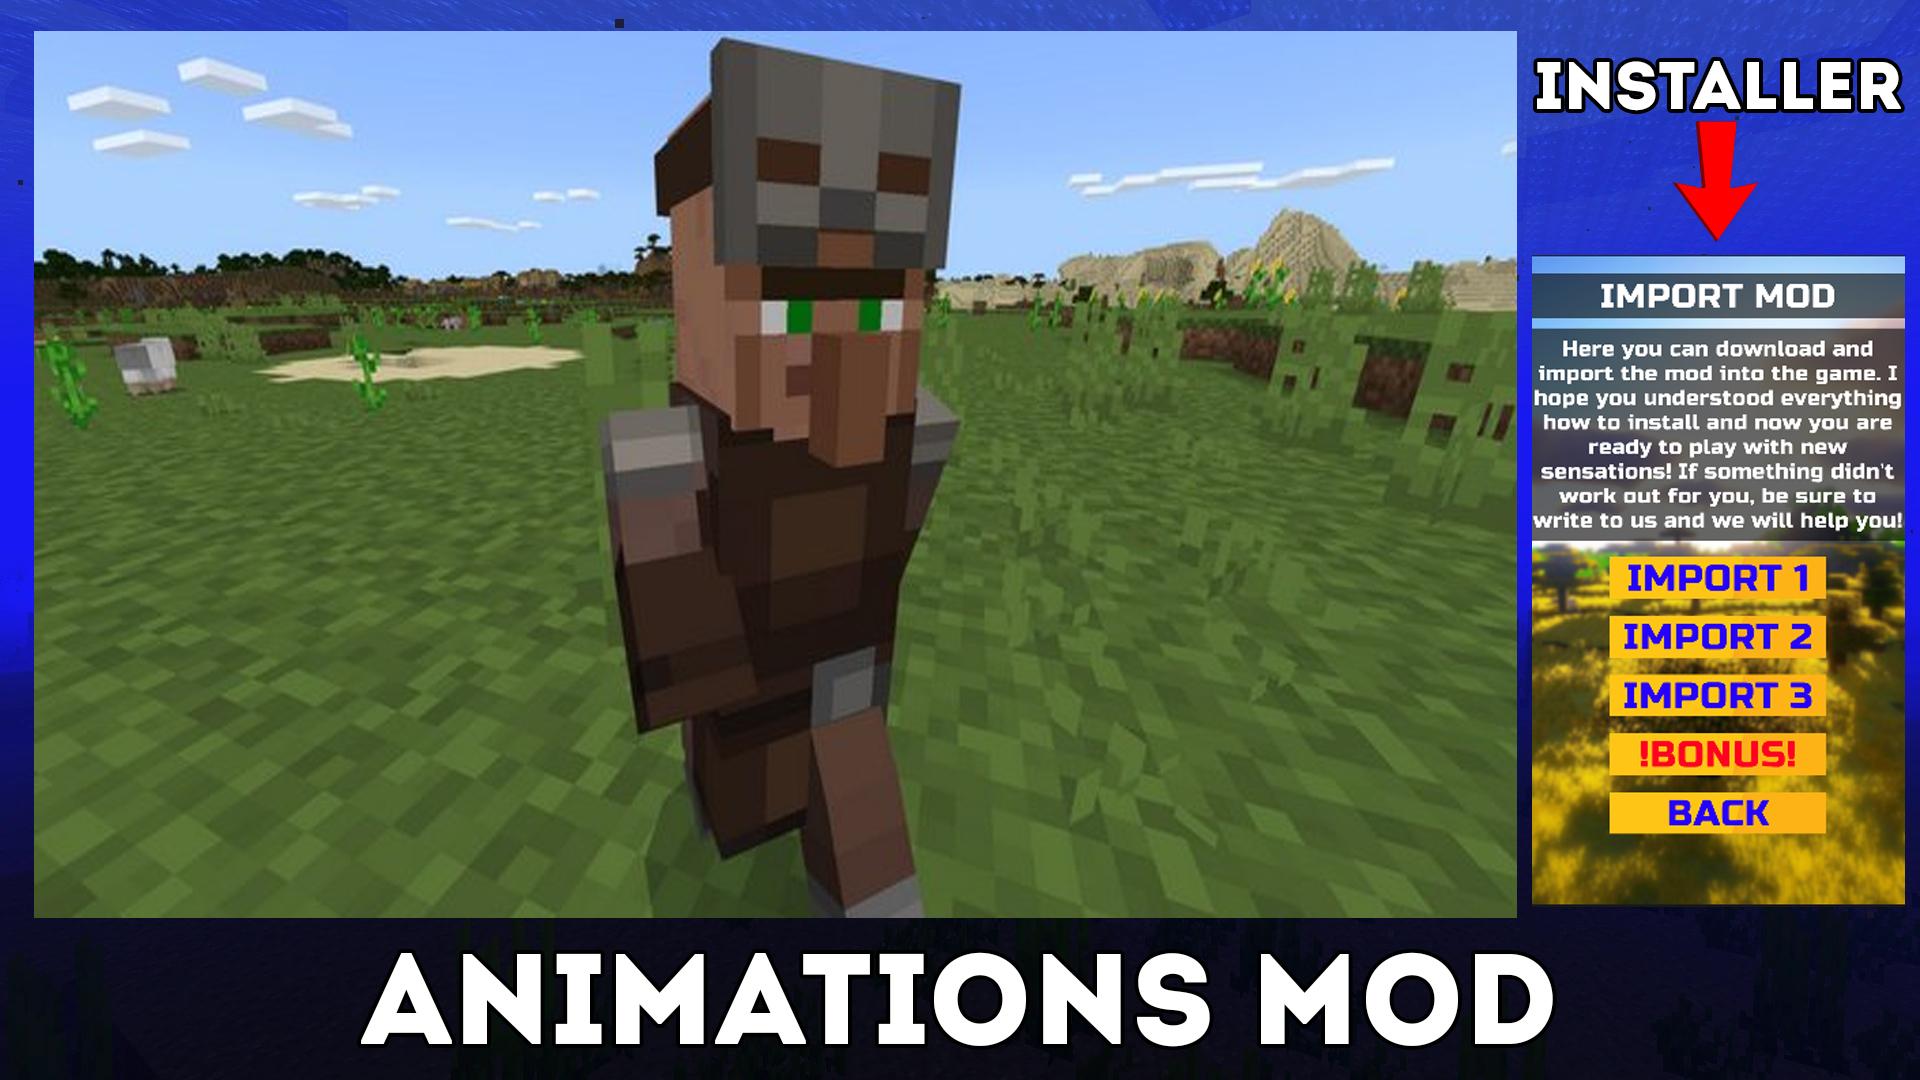 Chunk animator mod. Minecraft animation Mod. Improved Mobs. Rubber animations Mod for Minecraft.